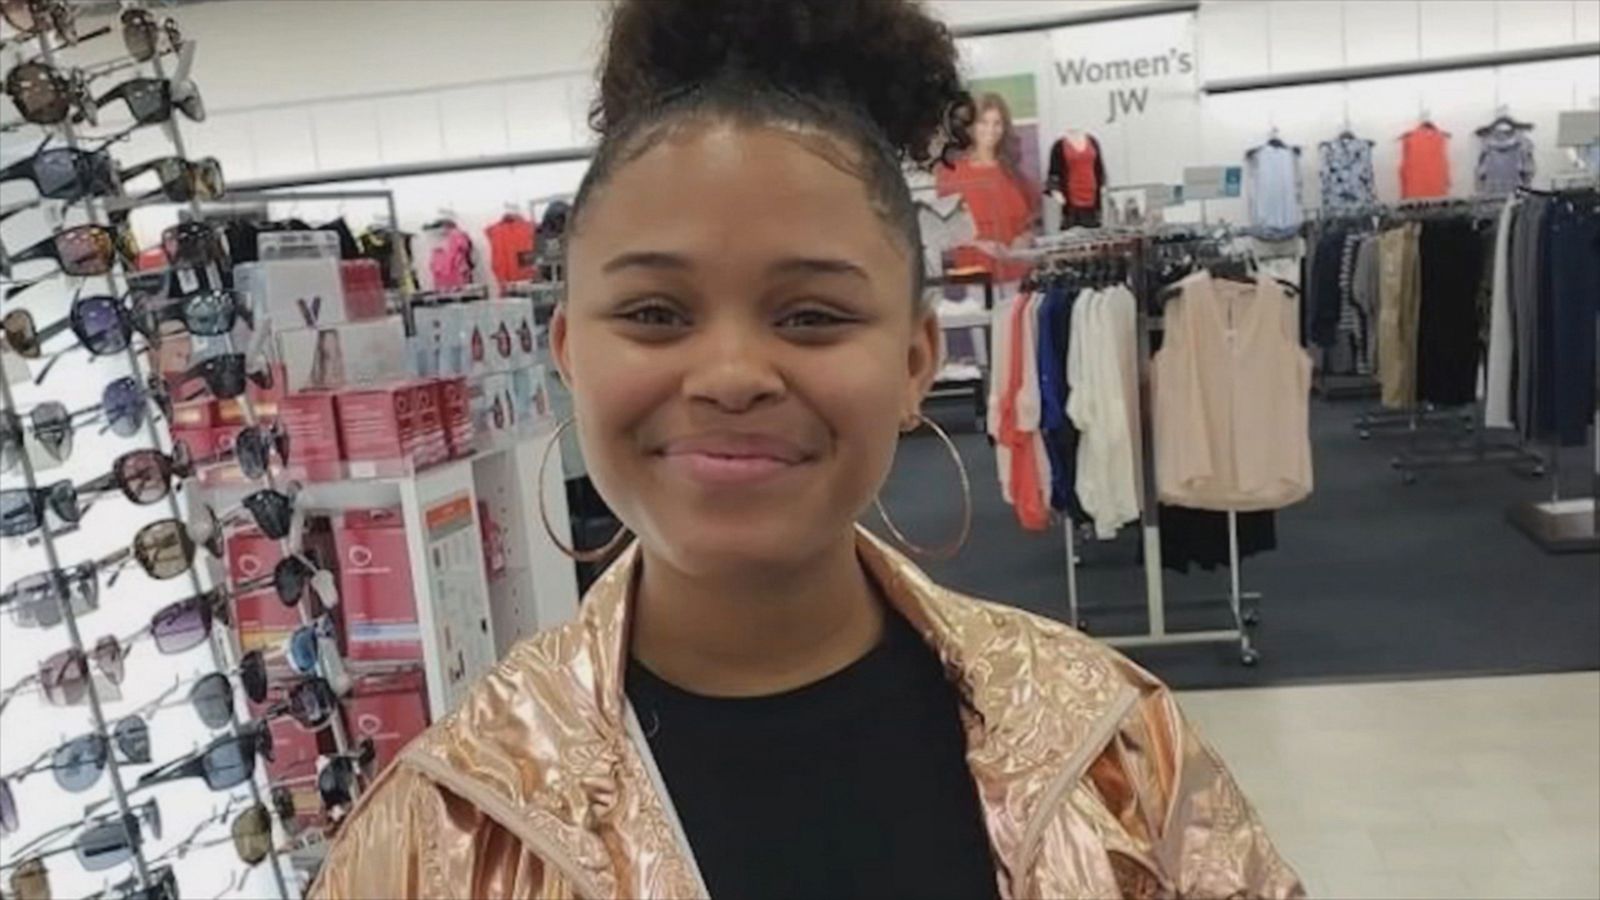 15 Year Old Girl Found Safe After Amber Alert Good Morning America